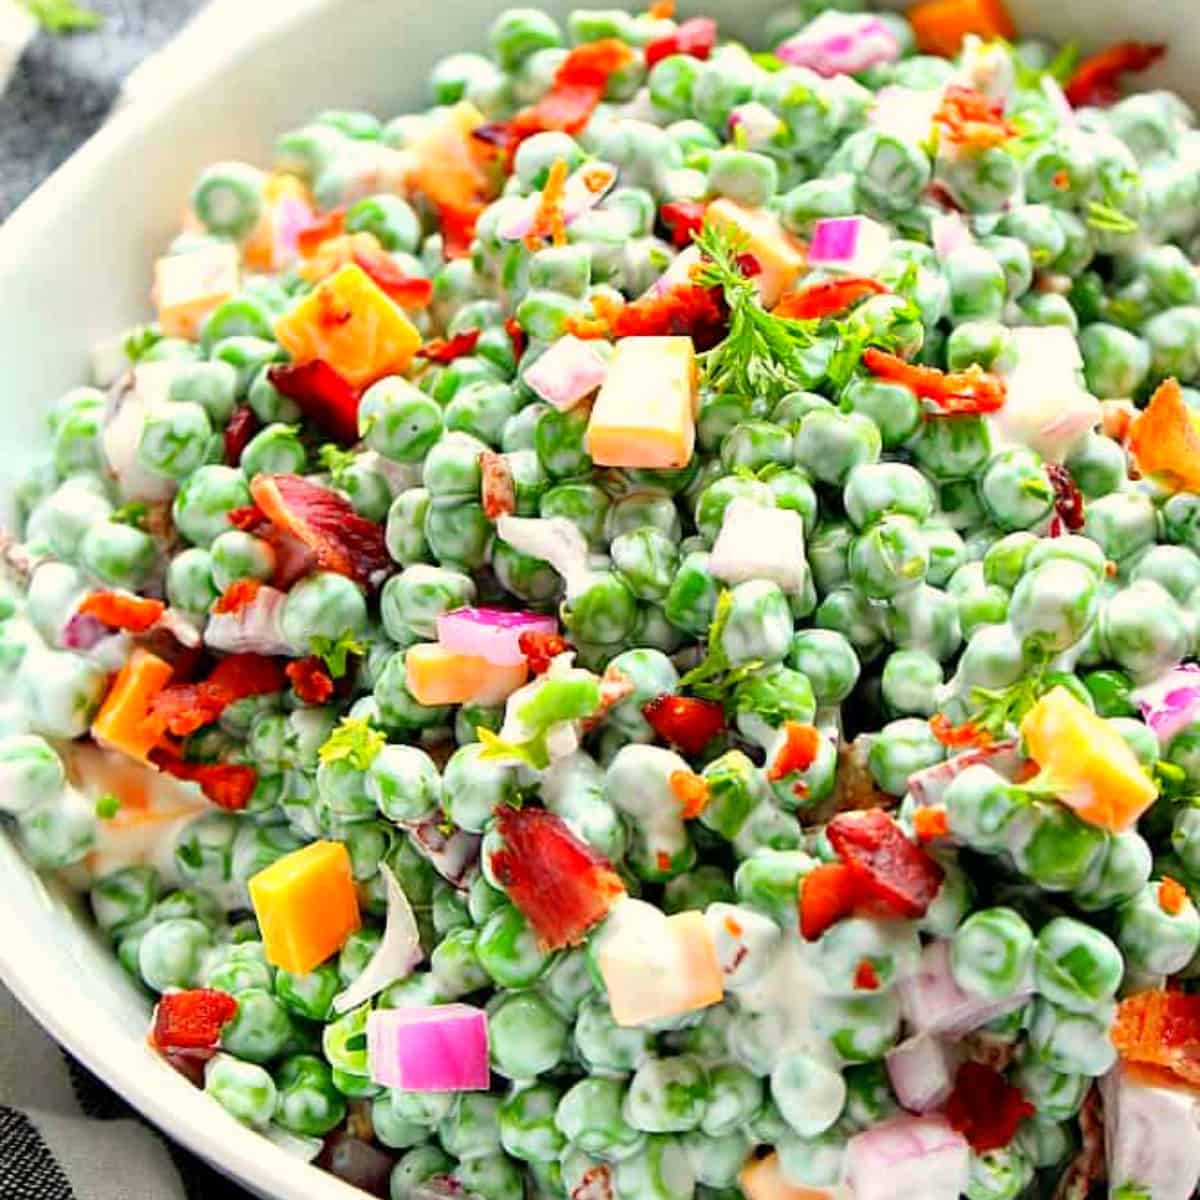 Pea salad in a white bowl.